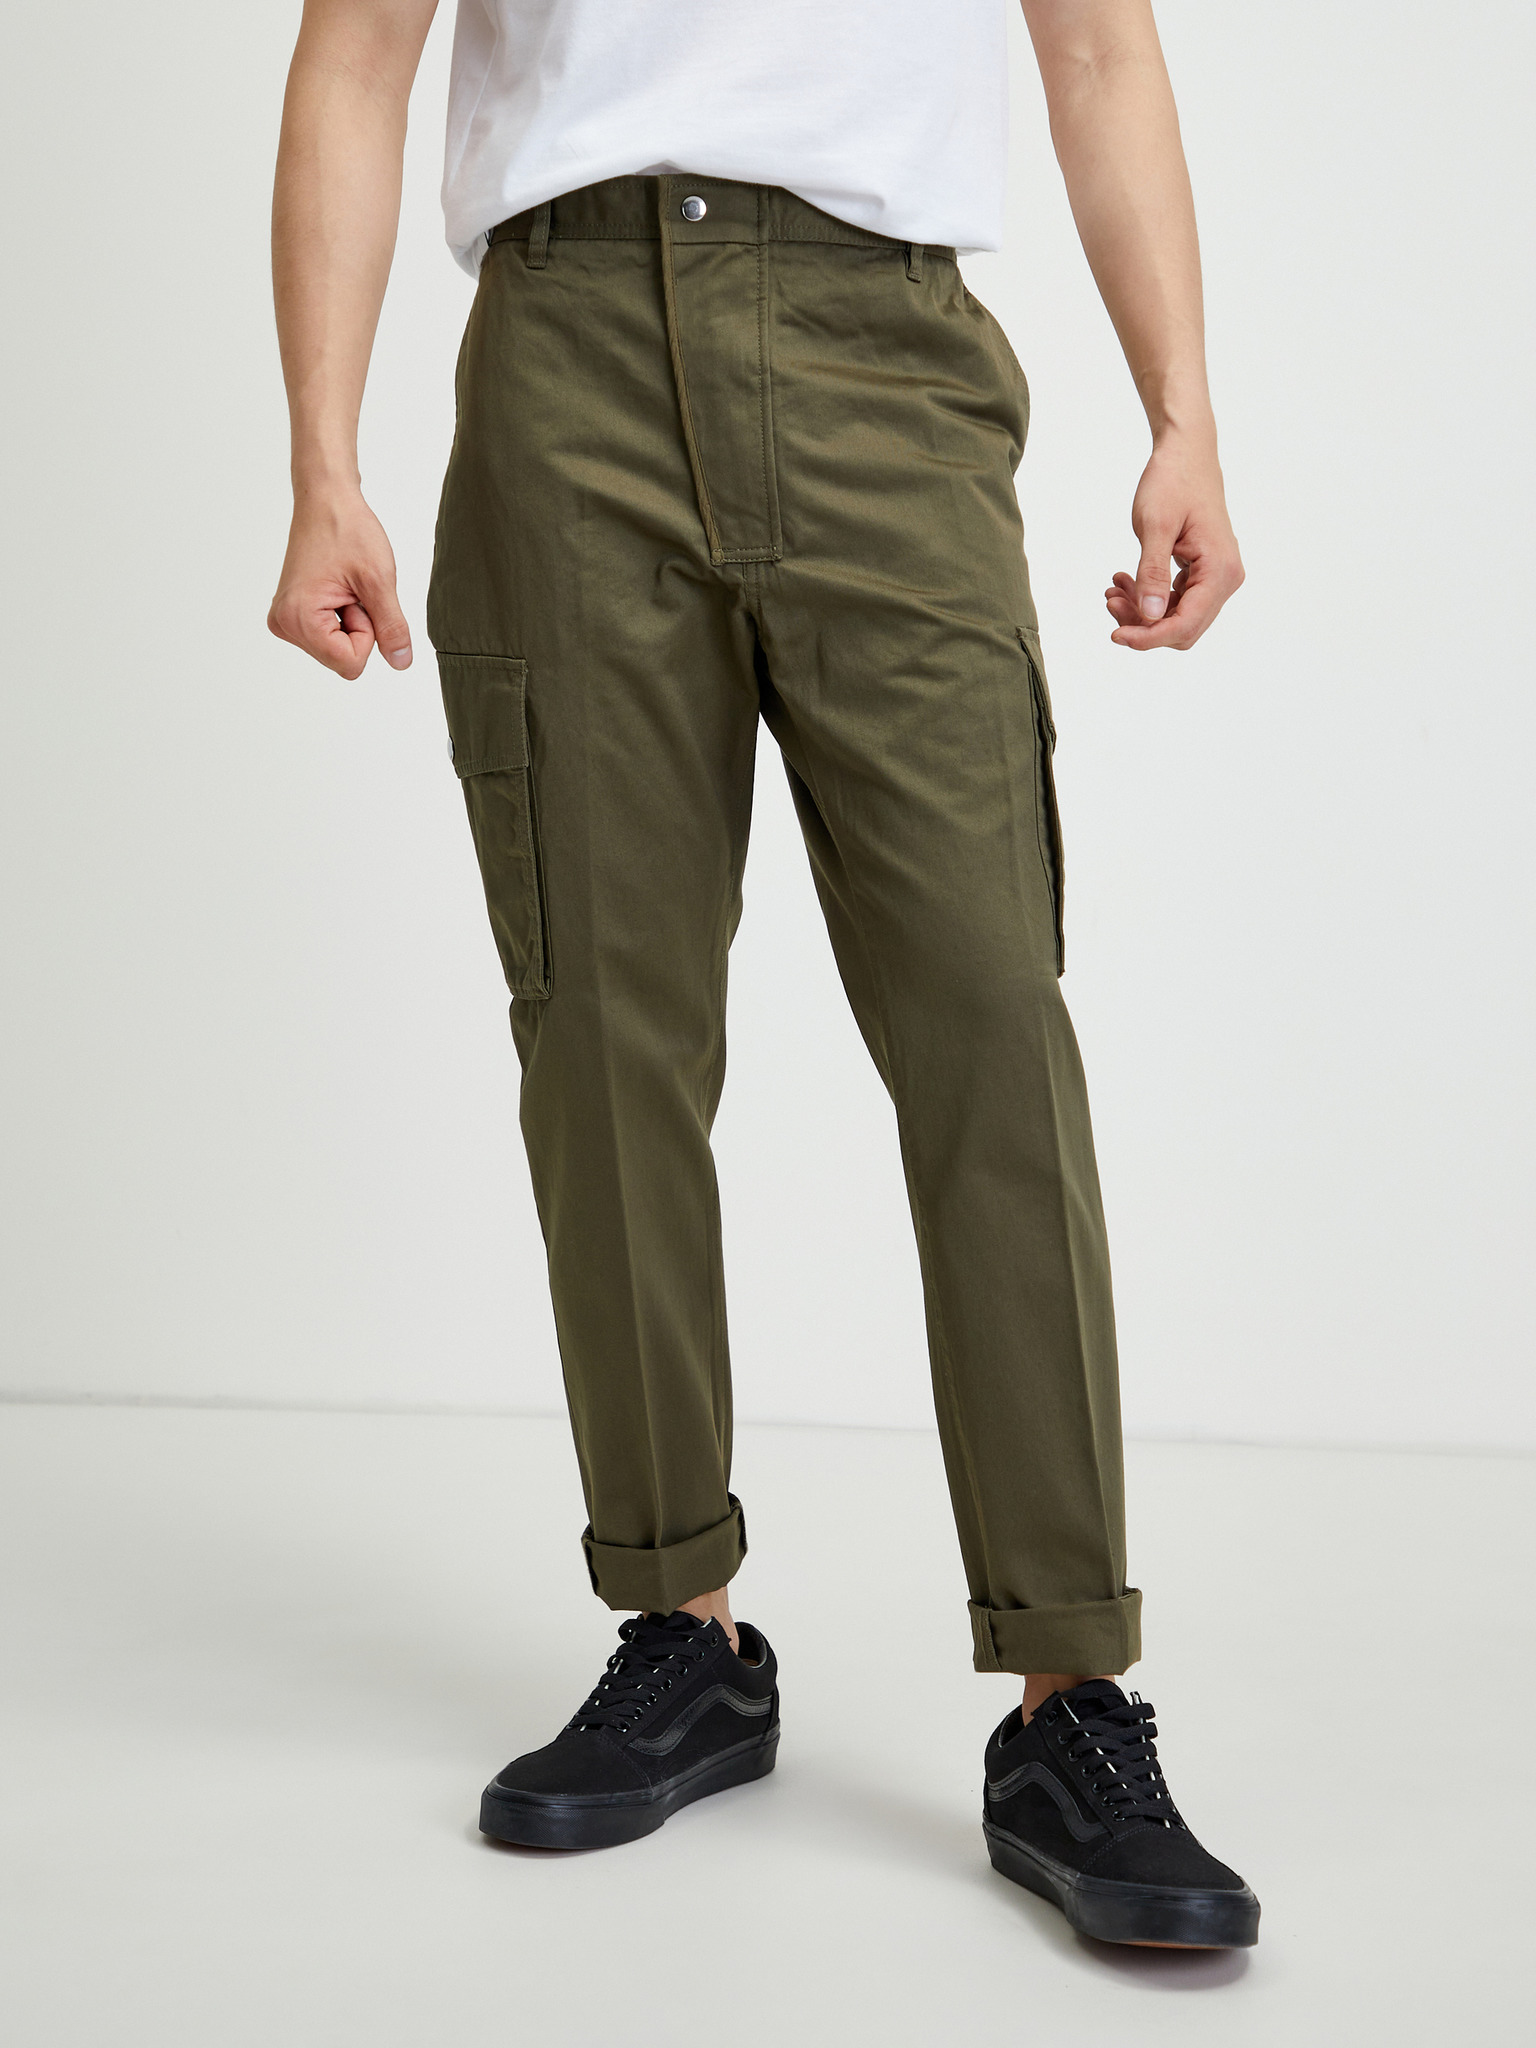 Cargo Pants Diesel Clearance - tundraecology.hi.is 1694501611